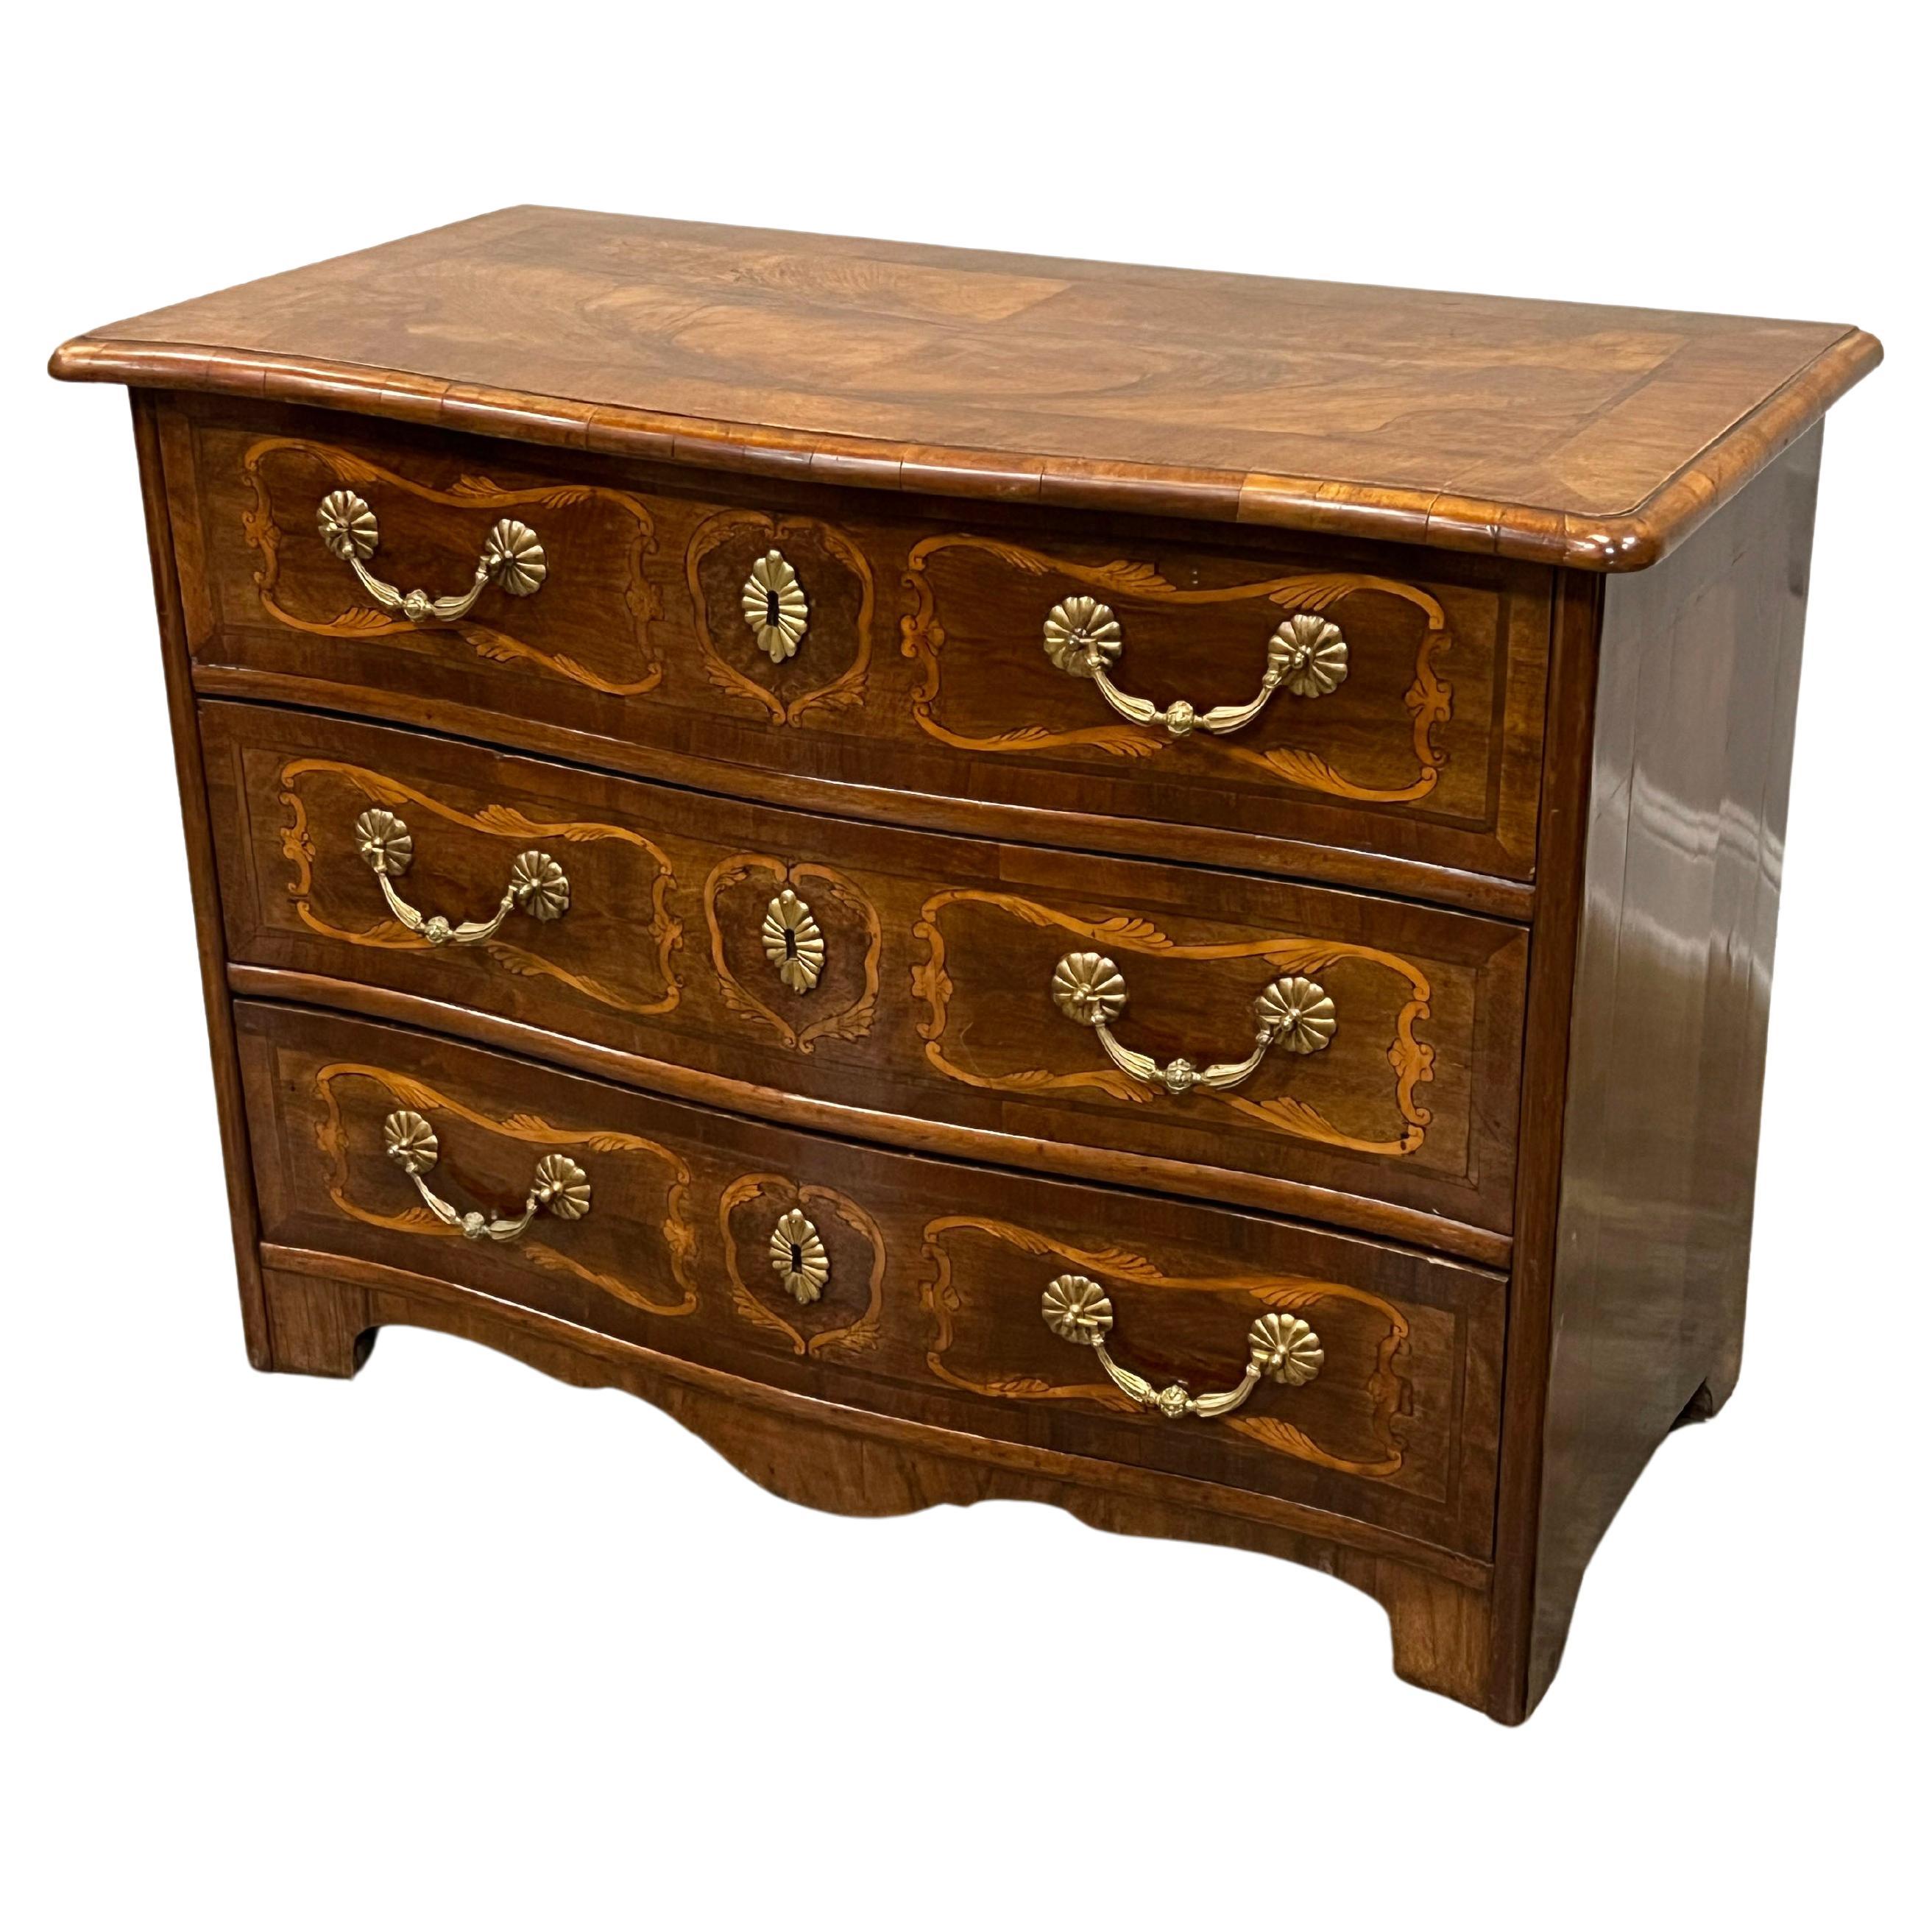 19th Century Inlaid Marquetry Commode In Walnut